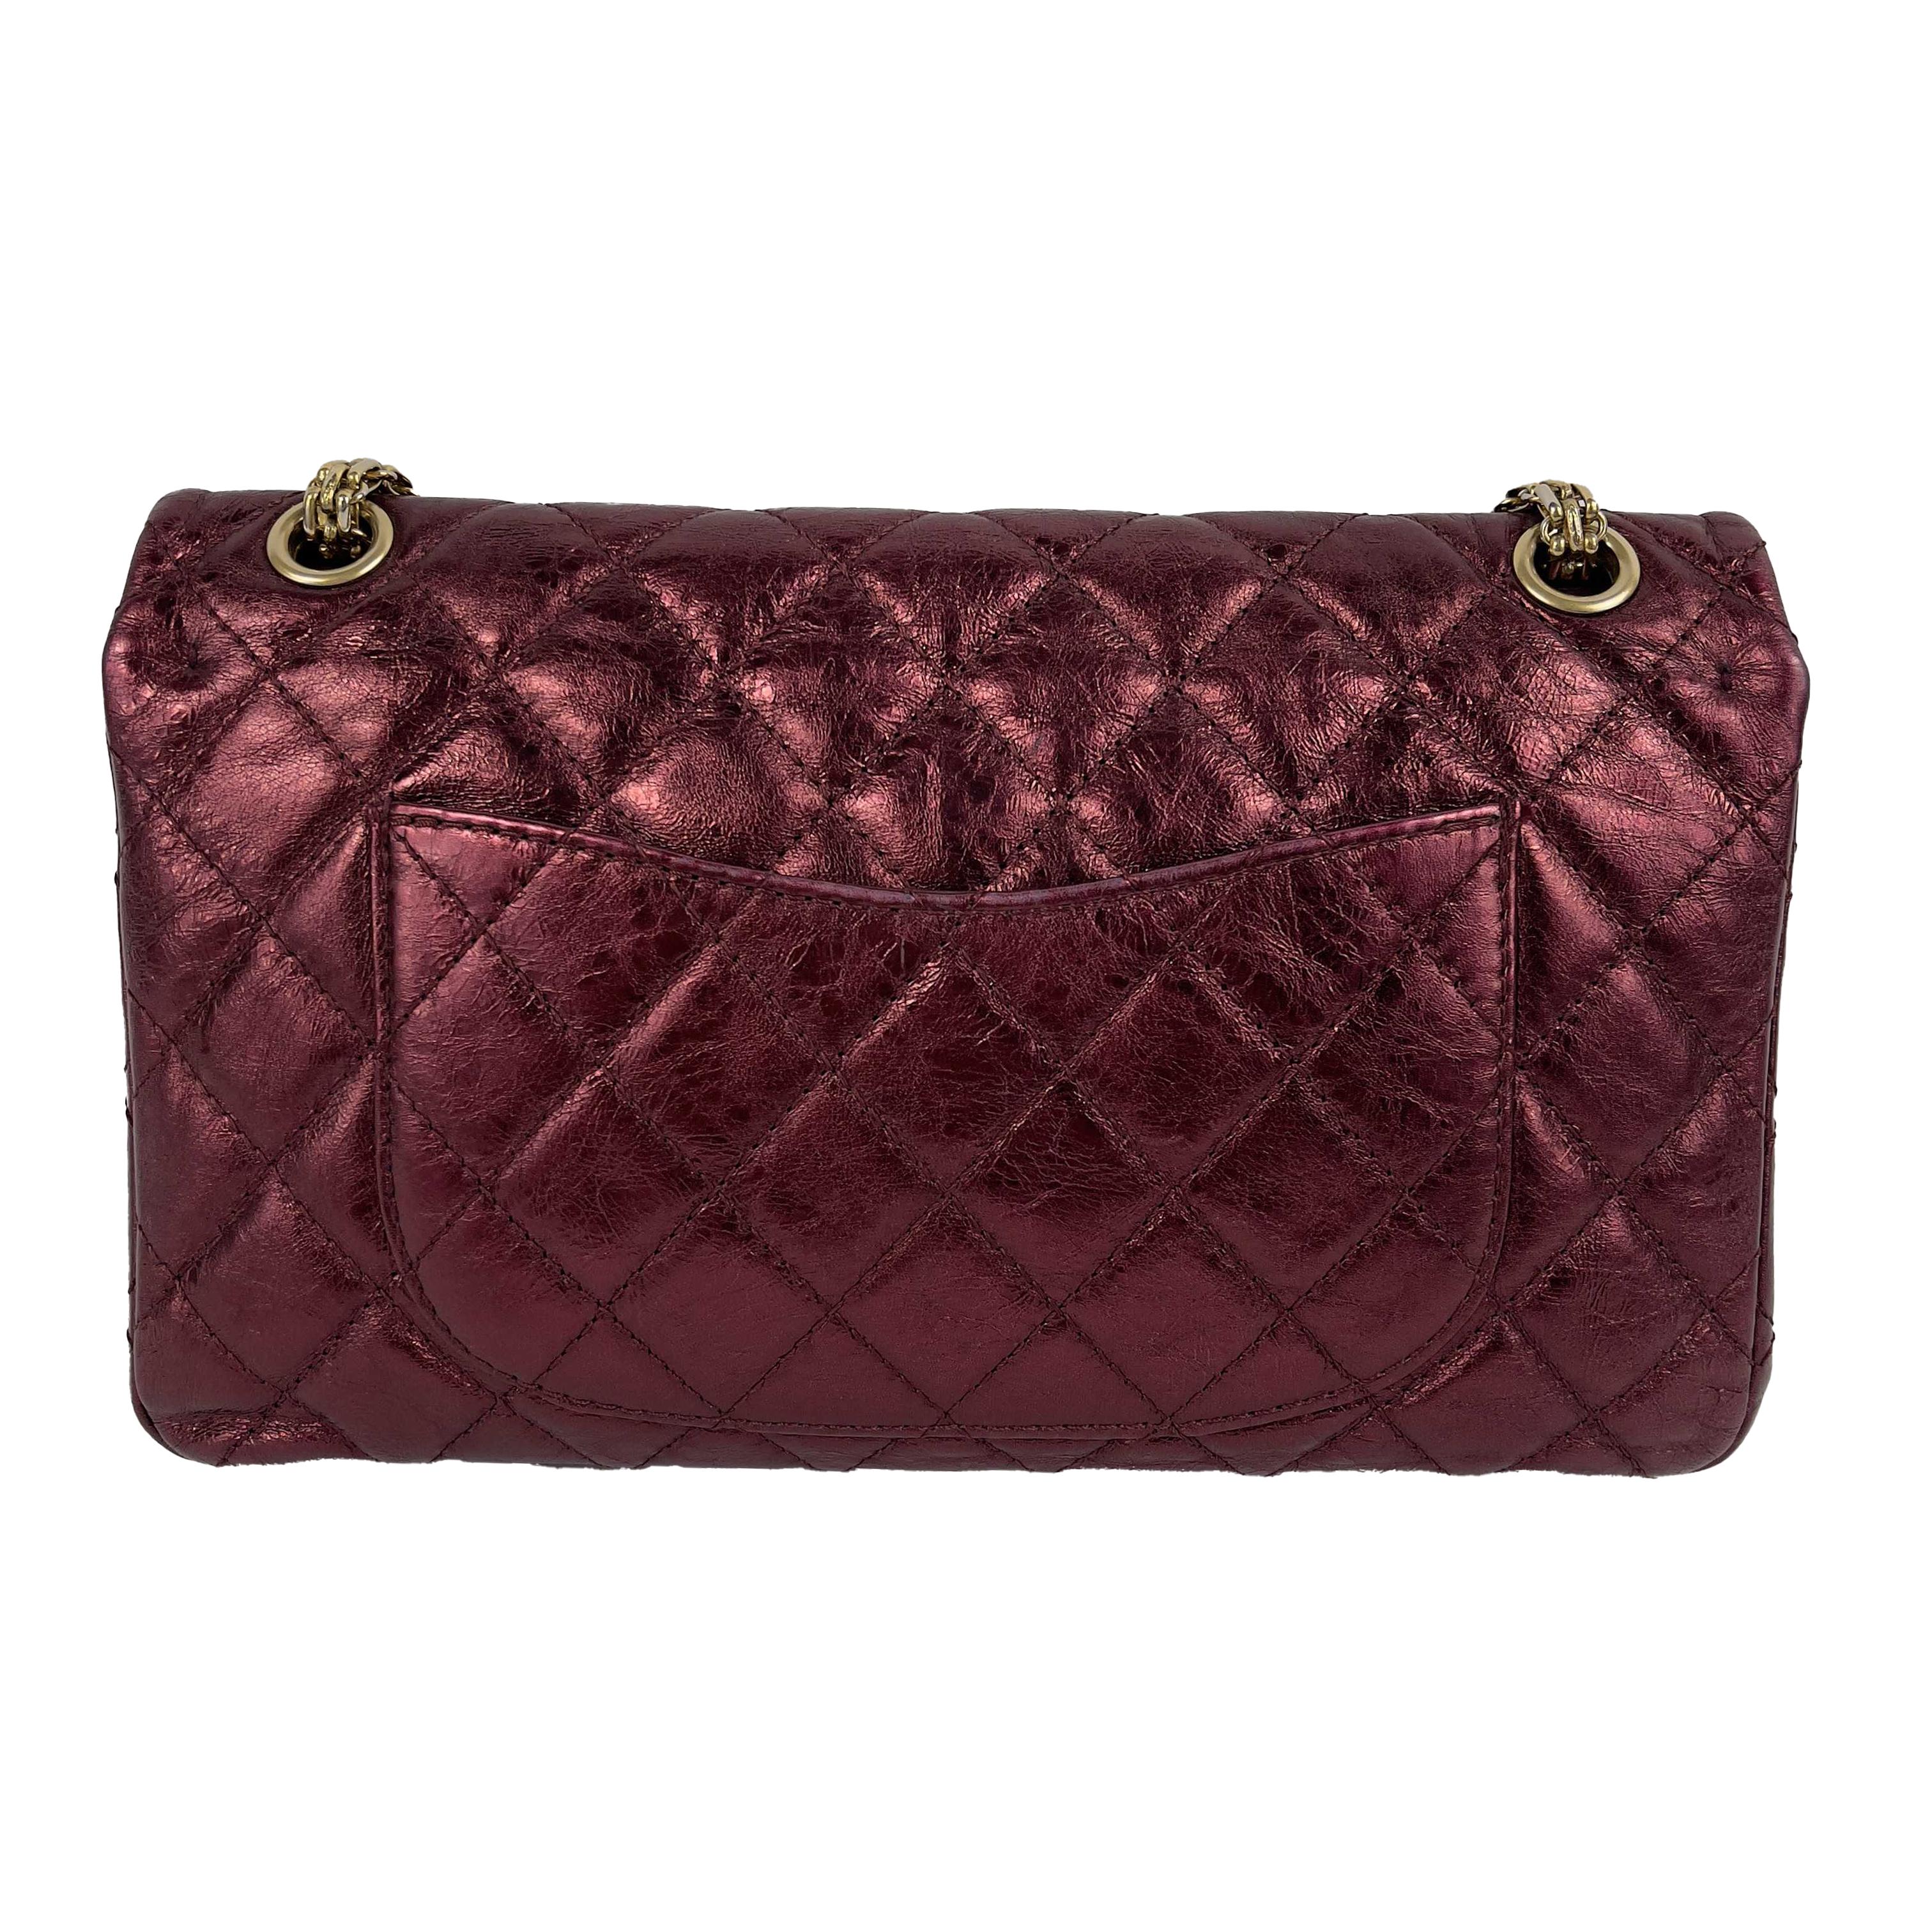 CHANEL -  METALLIC QUILTED CALFSKIN 2.55 REISSUE 227 DOUBLE FLAP - METALLIC MAROON, CHAMPAGNE GOLD - HANDBAG

DESCRIPTION

From the 2008-2009 collection, this Chanel Metallic Quilted Calfskin 2.55 Reissue 227 Double Flap Bag is crafted from a